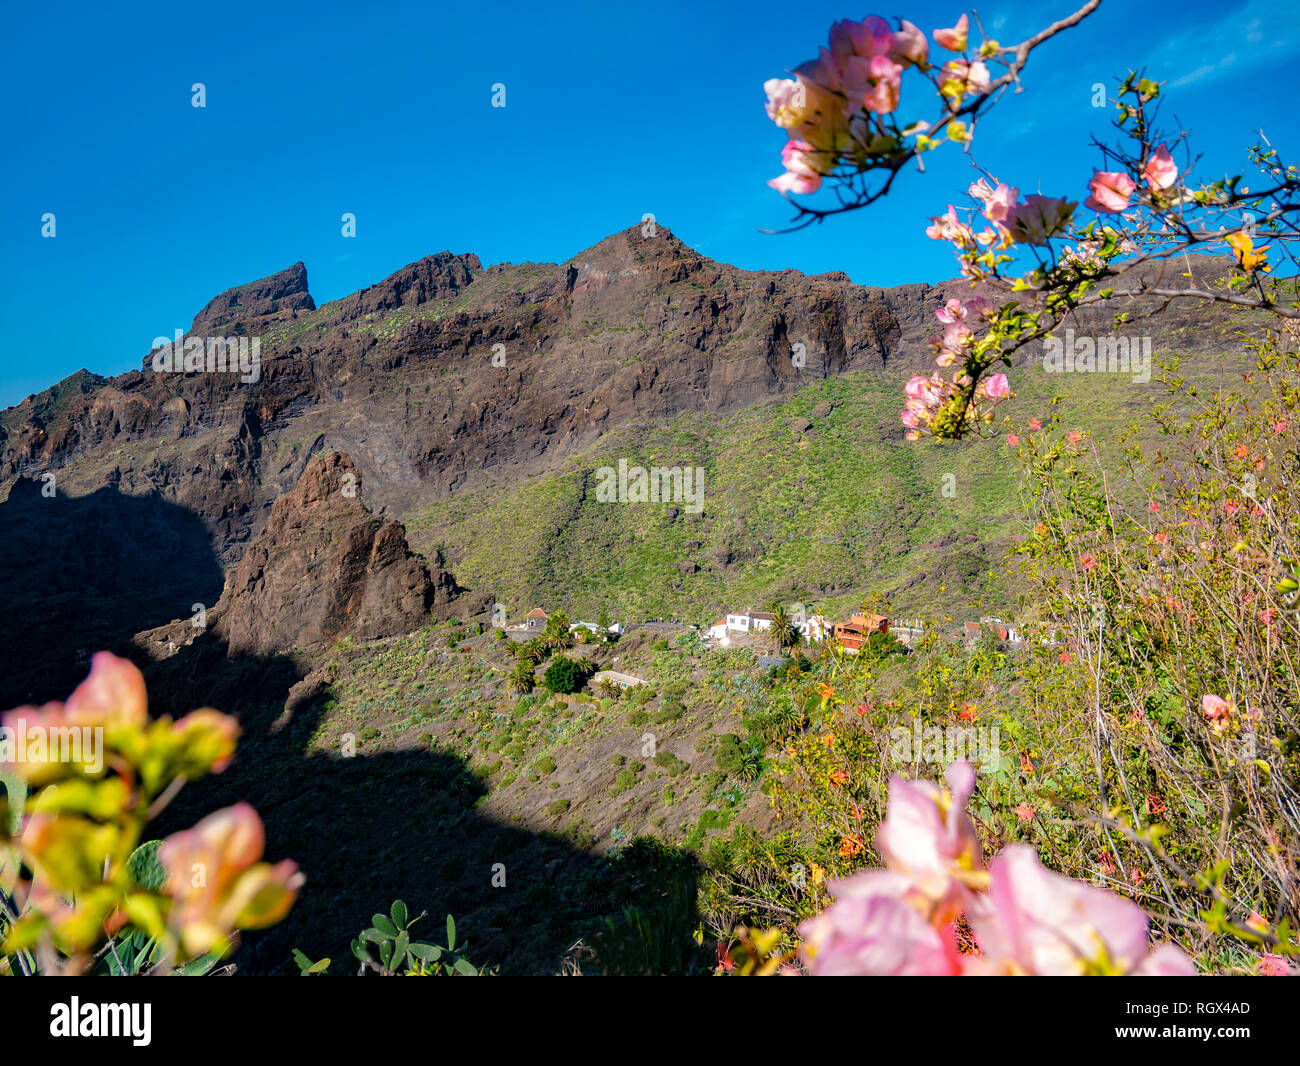 Beautiful landscape over the famous Masca village surrounded by flowers in spring season, in Tenerife island Stock Photo